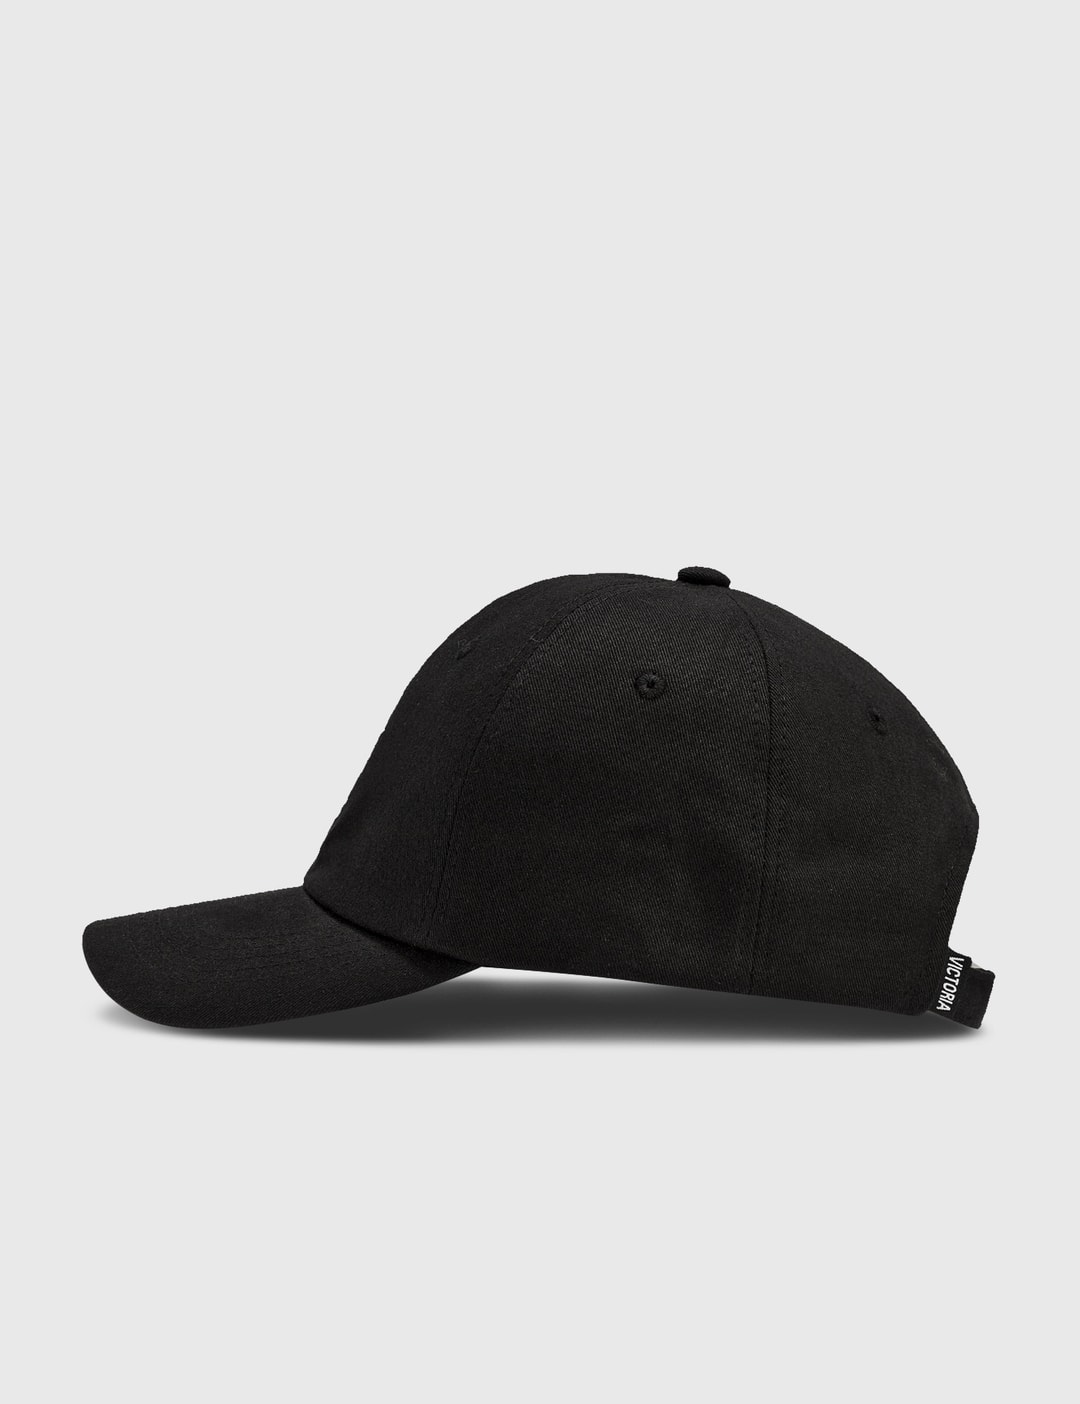 Victoria - Queenhead Logo Cap | HBX - Globally Curated Fashion and ...